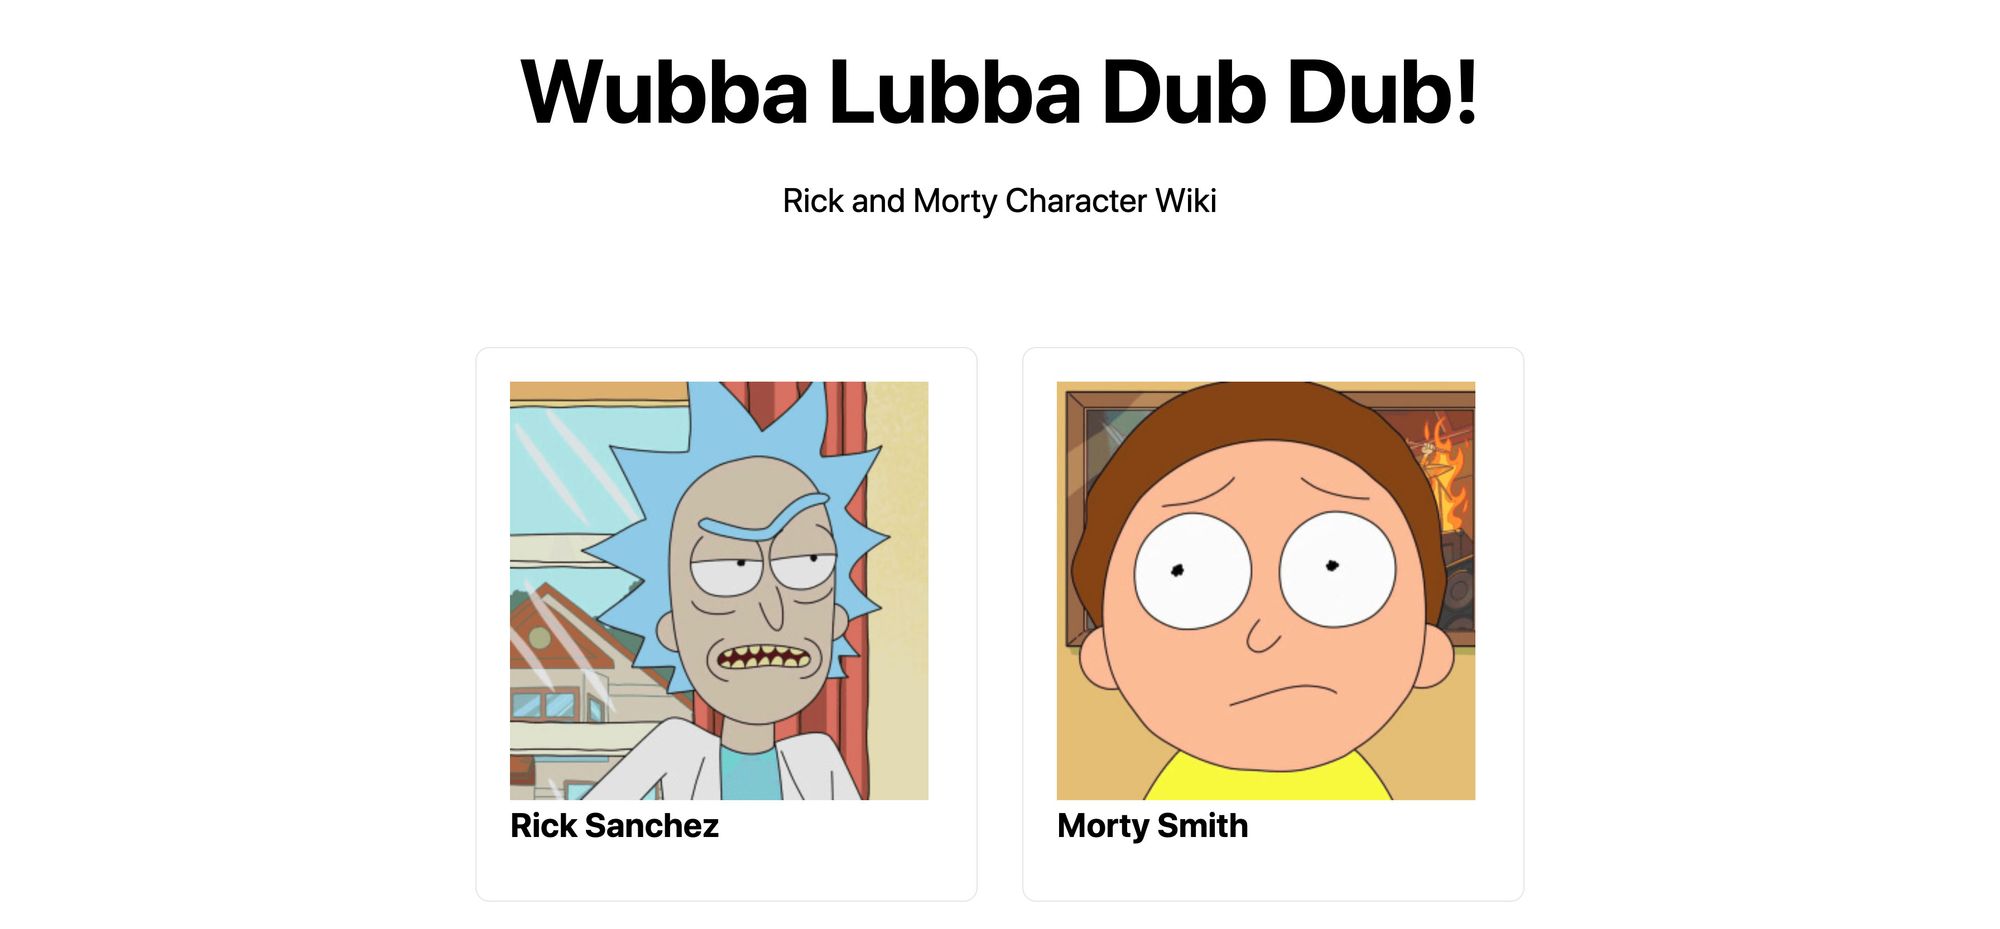 rick-and-morty-wiki-with-character-names-and-pictures